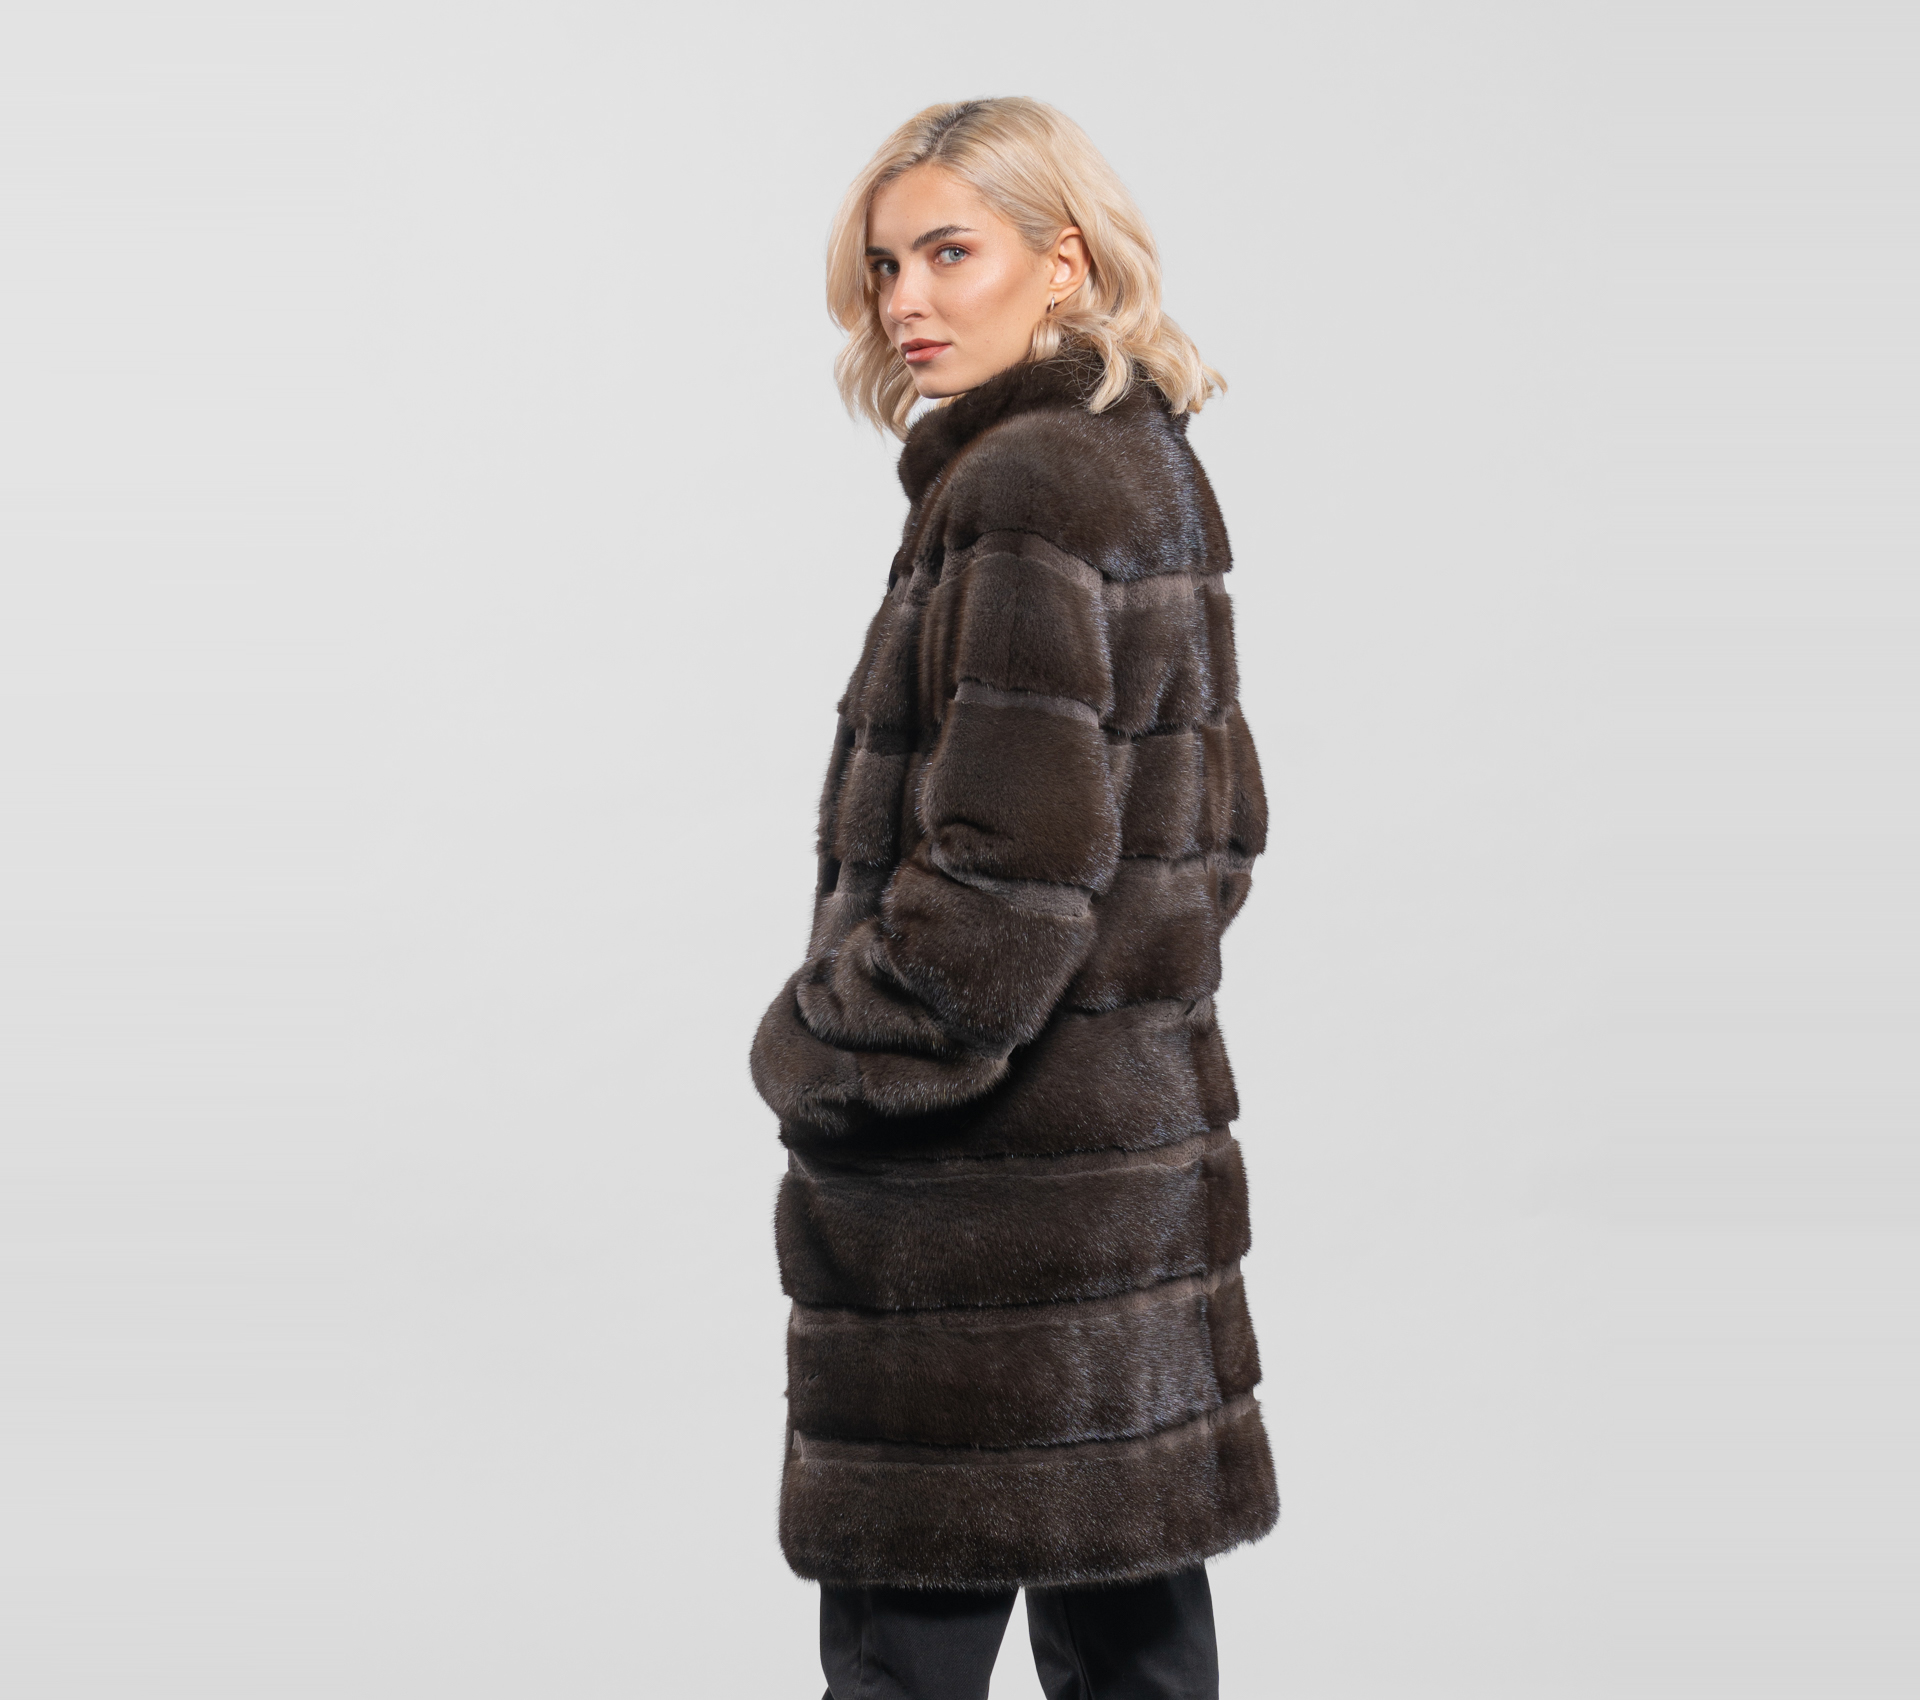 Fur Jacket With Sheared Mink Layers